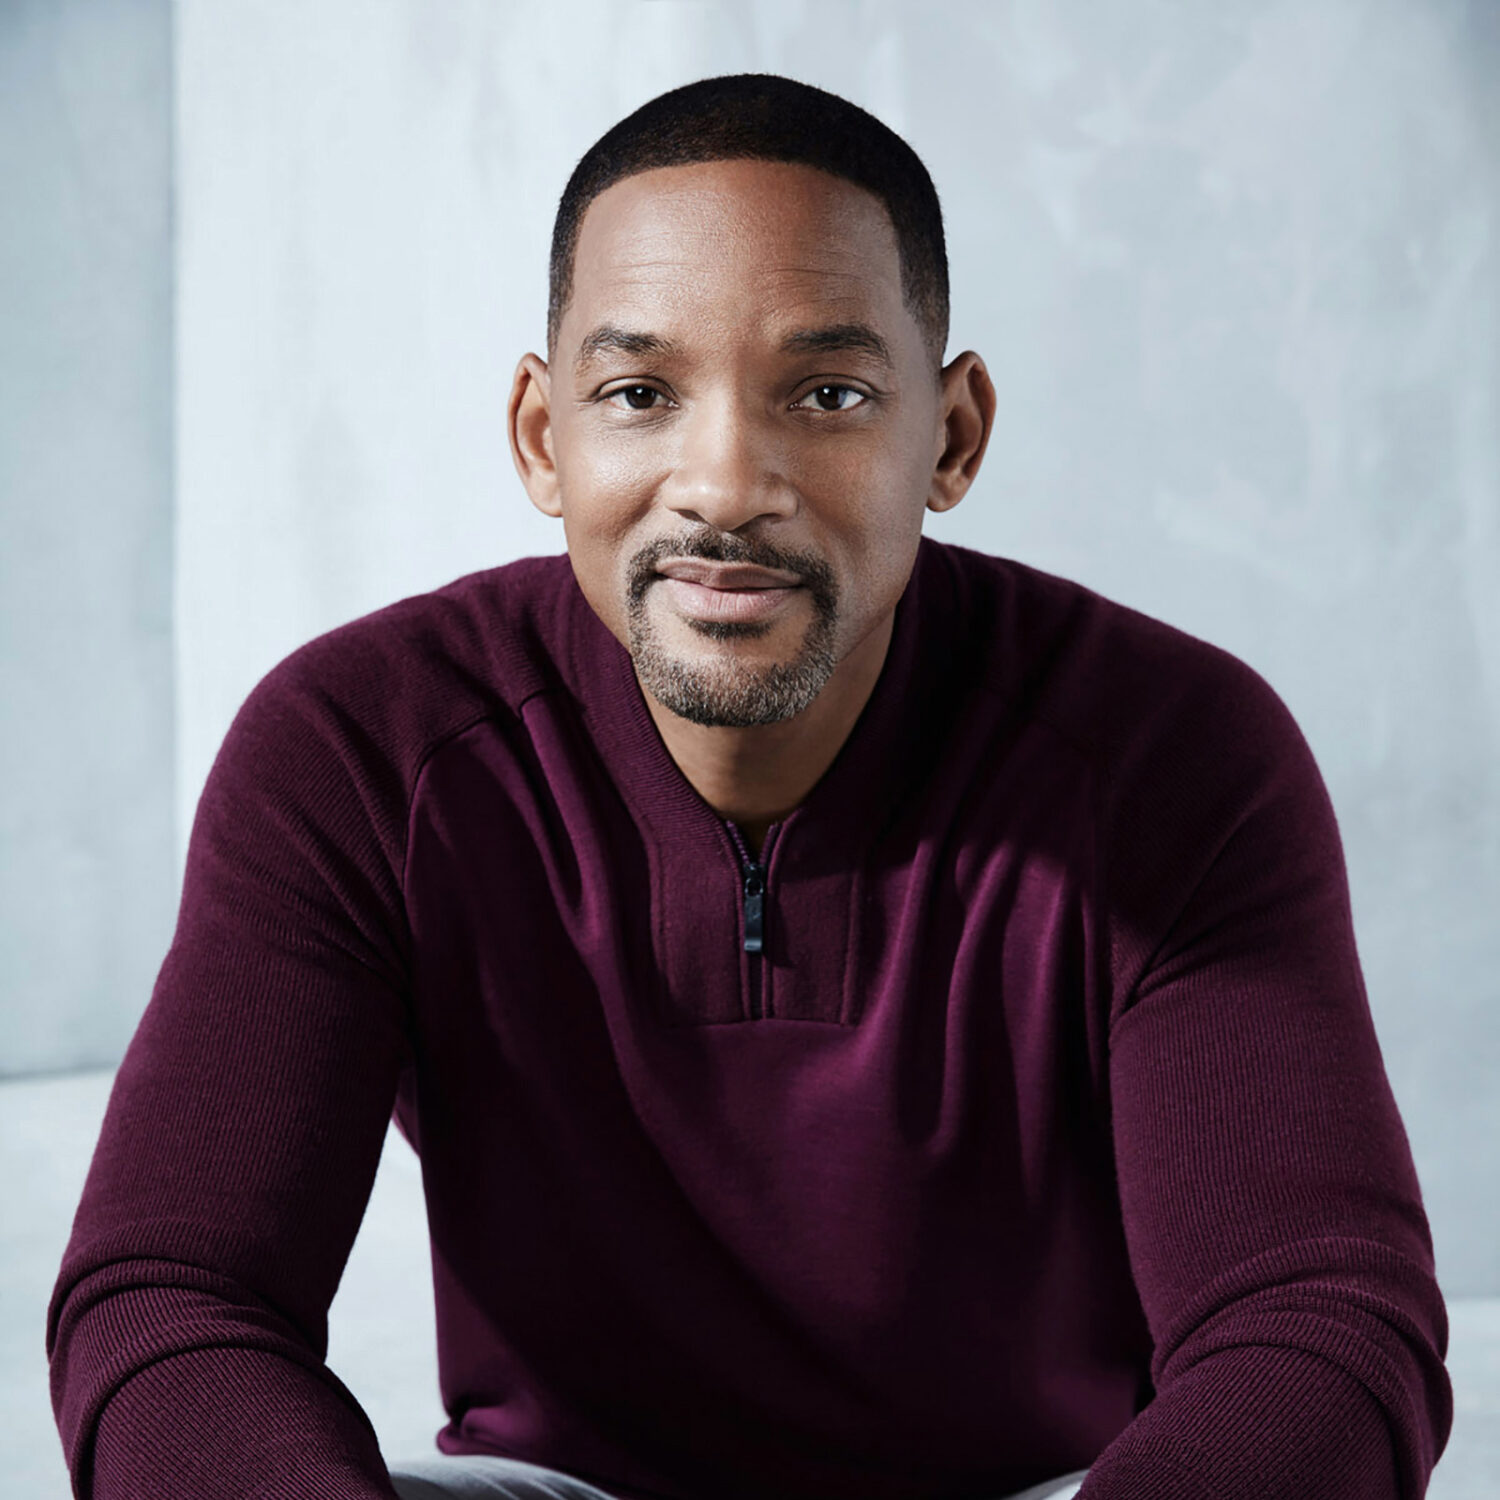 will Smith Is Crystal Clear And Eager To Reintroduce Himself 1a